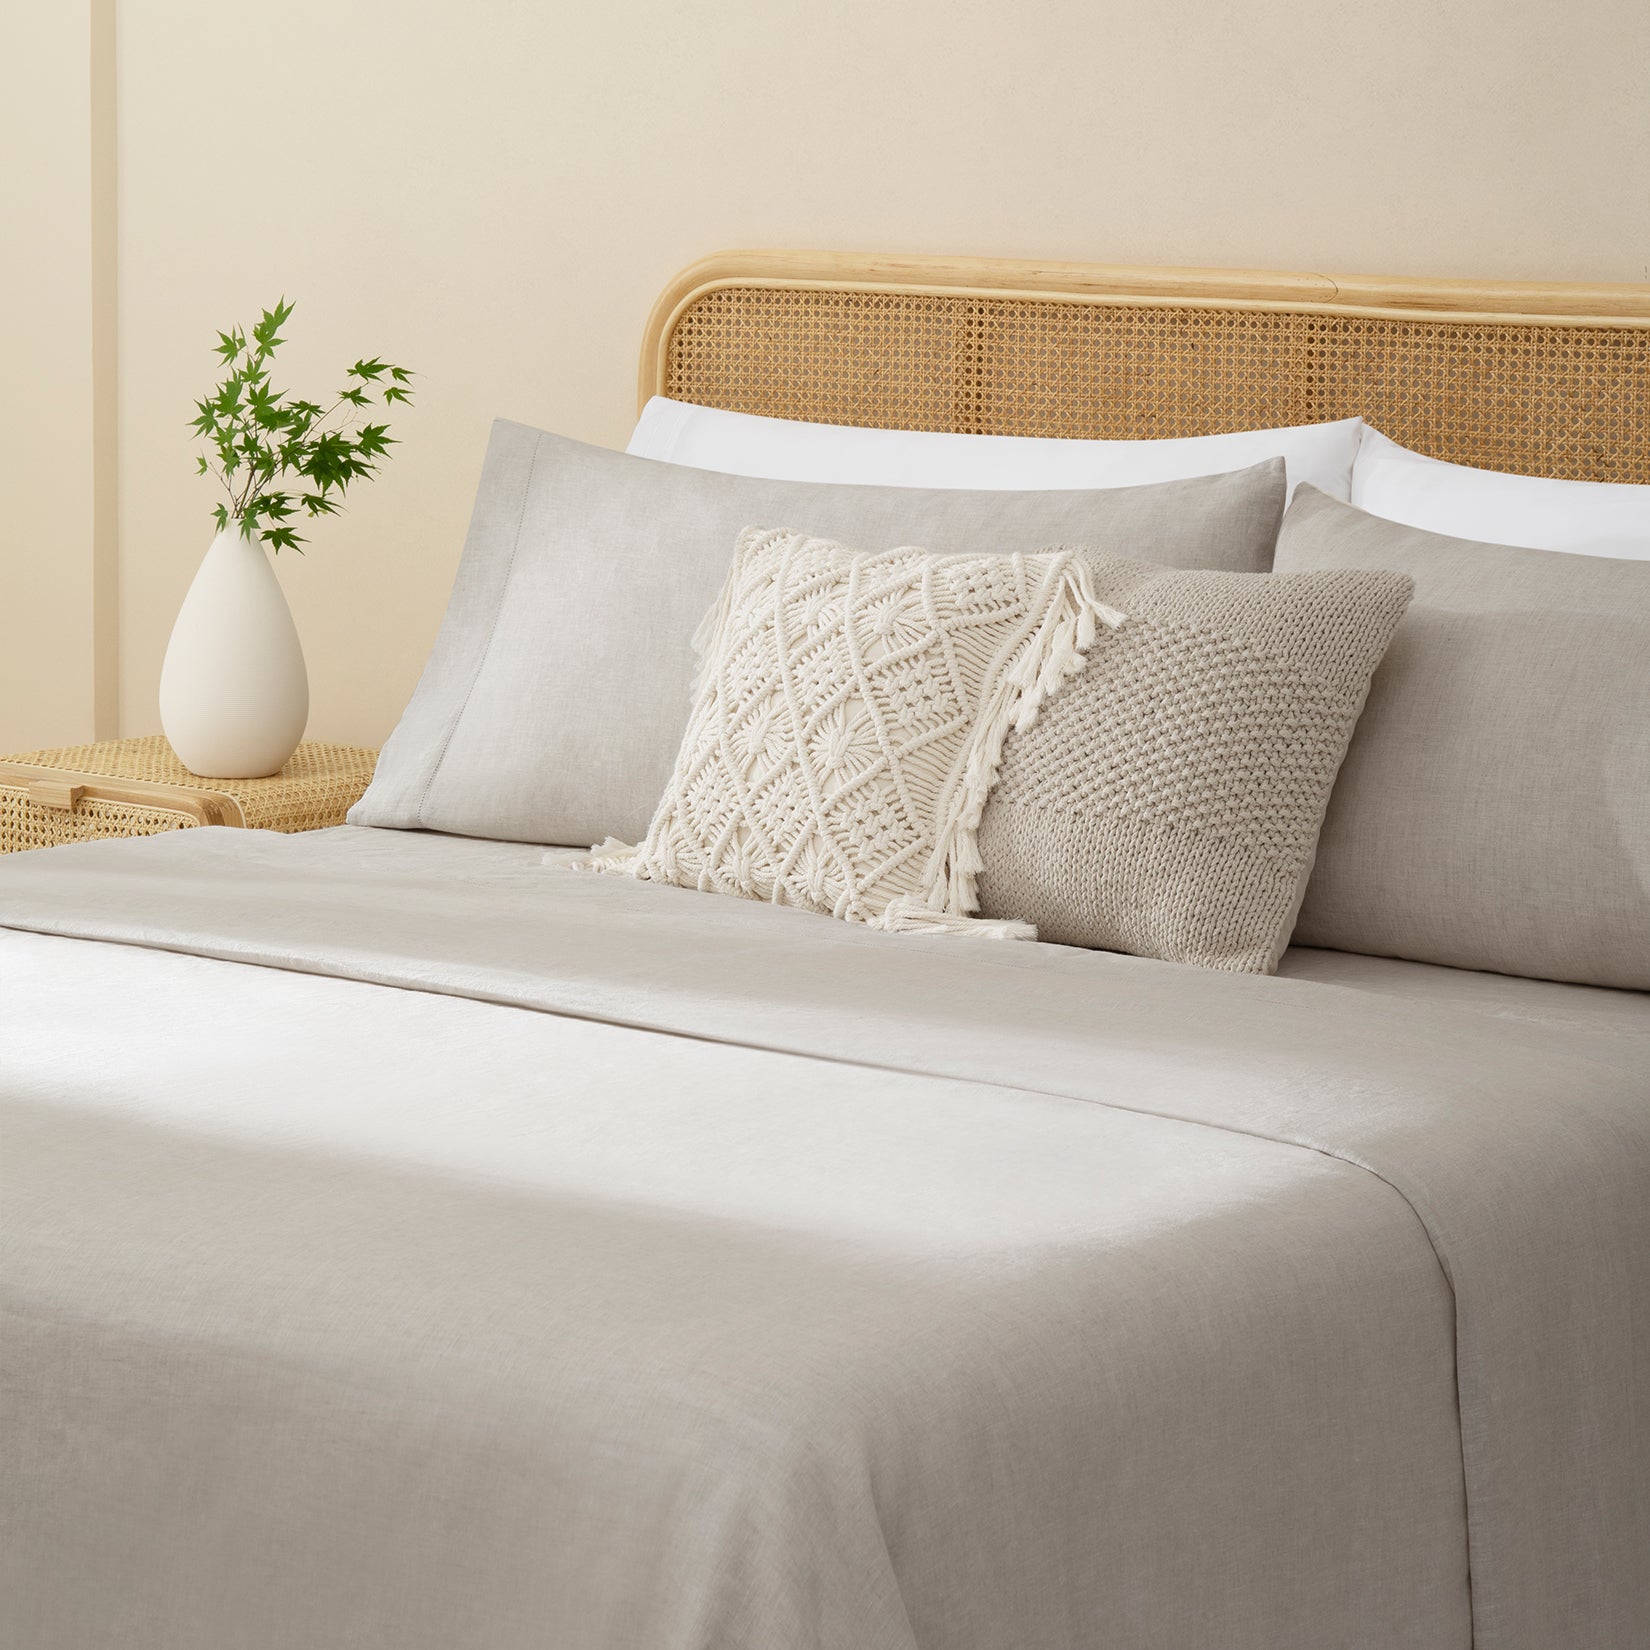 Olivia natural taupe linen sheet set. Natural taupelinen pillows and natural taupe duvet on bed with plant on side table from side angle.